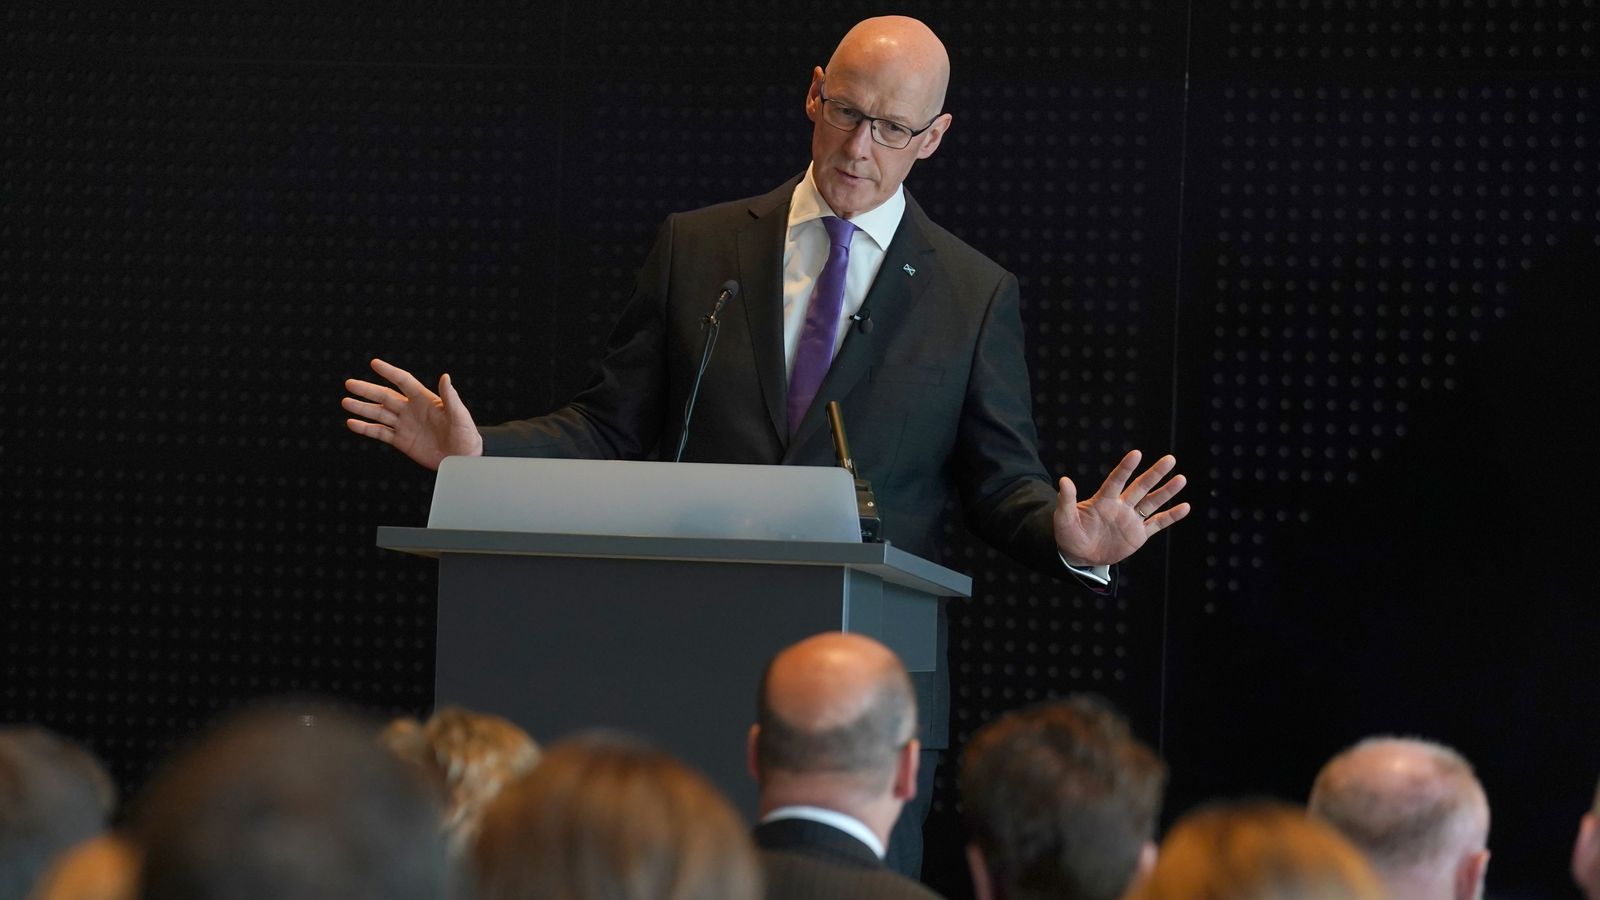 Scotland First Minister John Swinney admits general election will be a 'challenge' for SNP but party 'united'